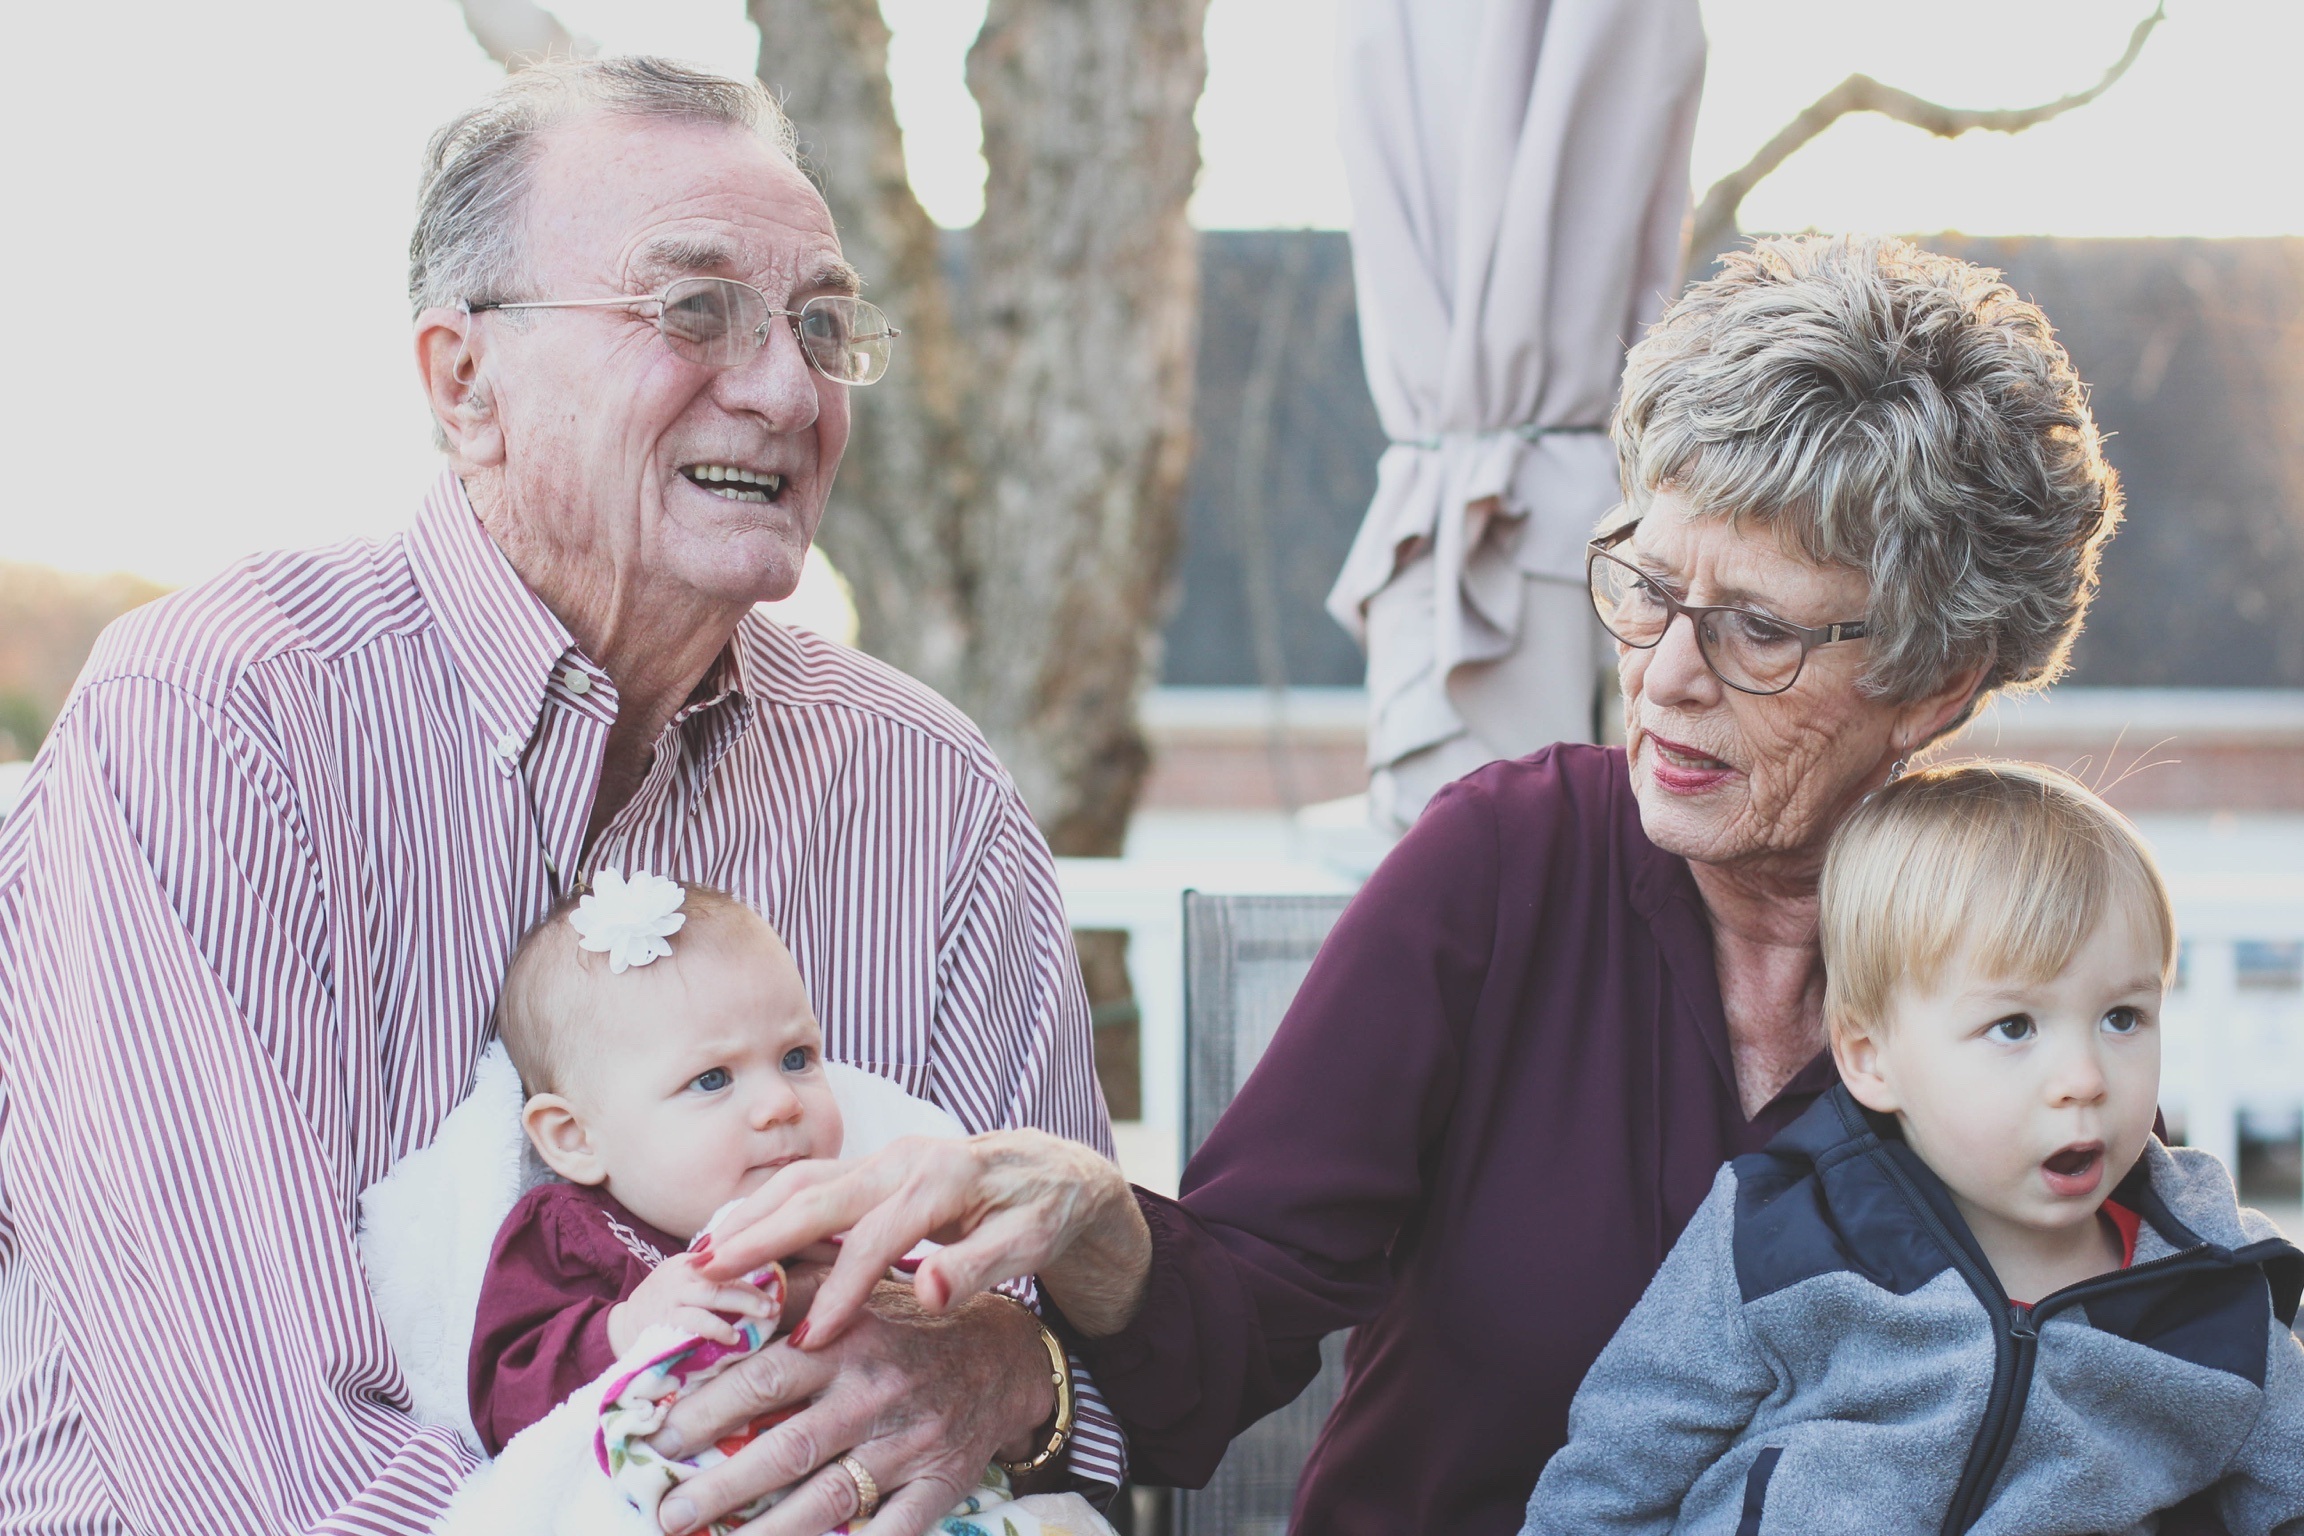 do you as a grandparent have the right to spend time with your grandchildren